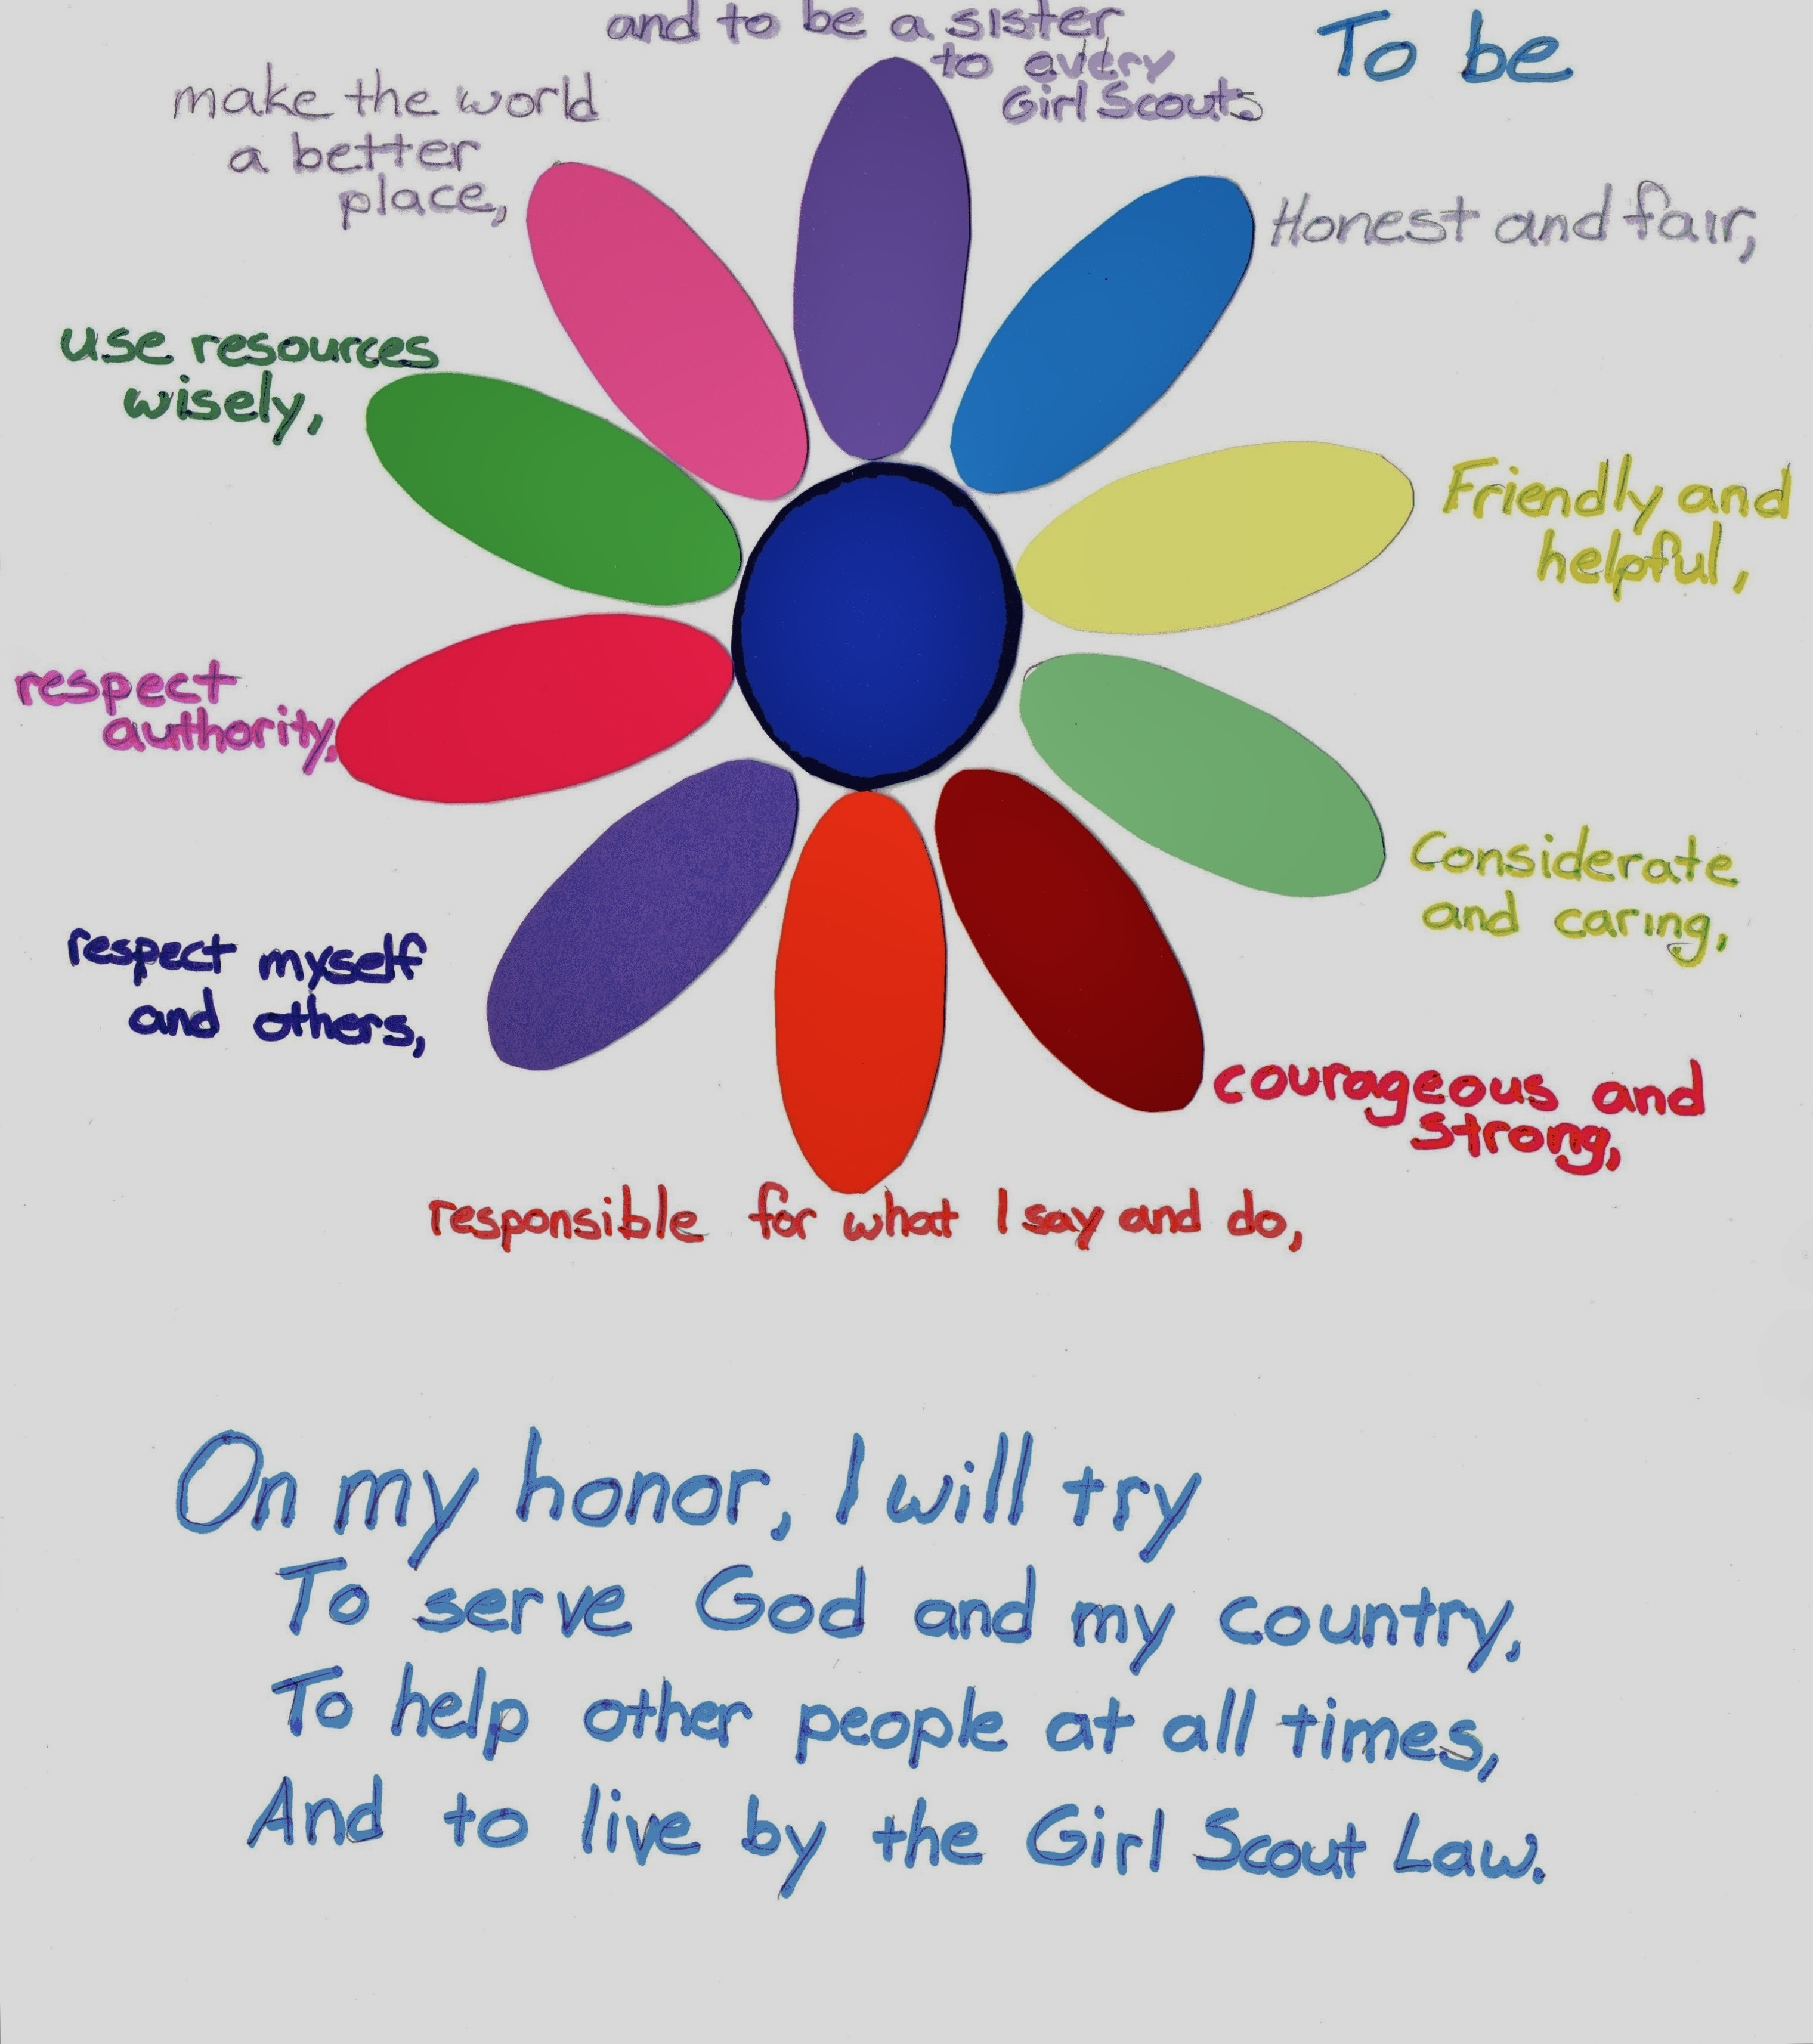 2014 4 girl scout law petals flower chart mock up